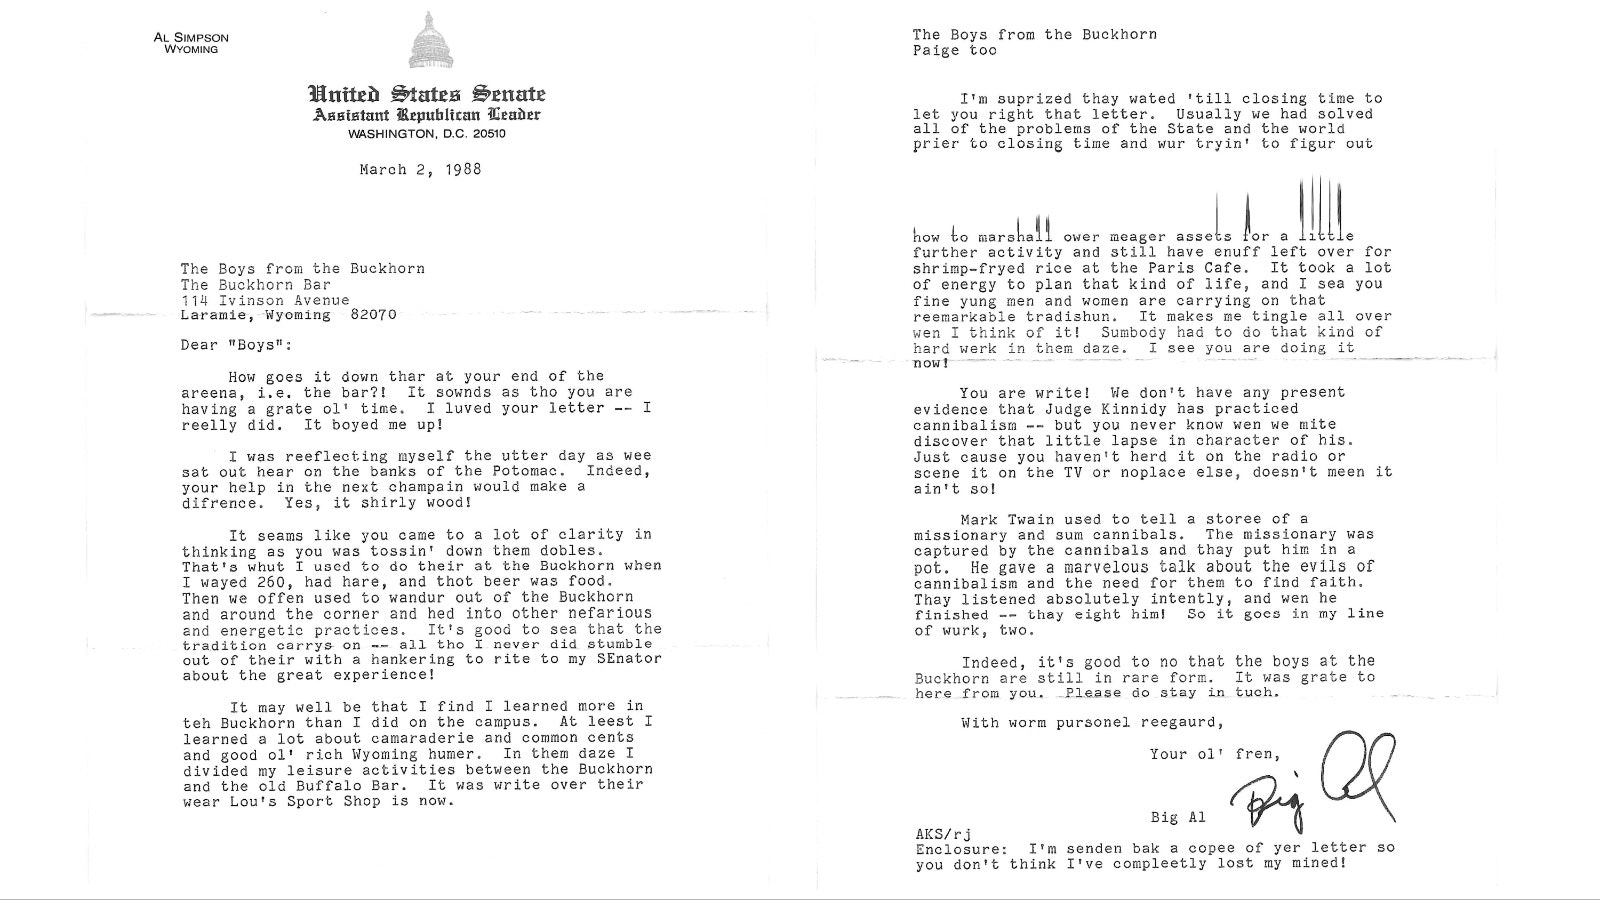 U.S. Sen. Al Simpson, R-Wyoming, wrote this response to a letter he received from a group of Buckhorn Bar patrons.